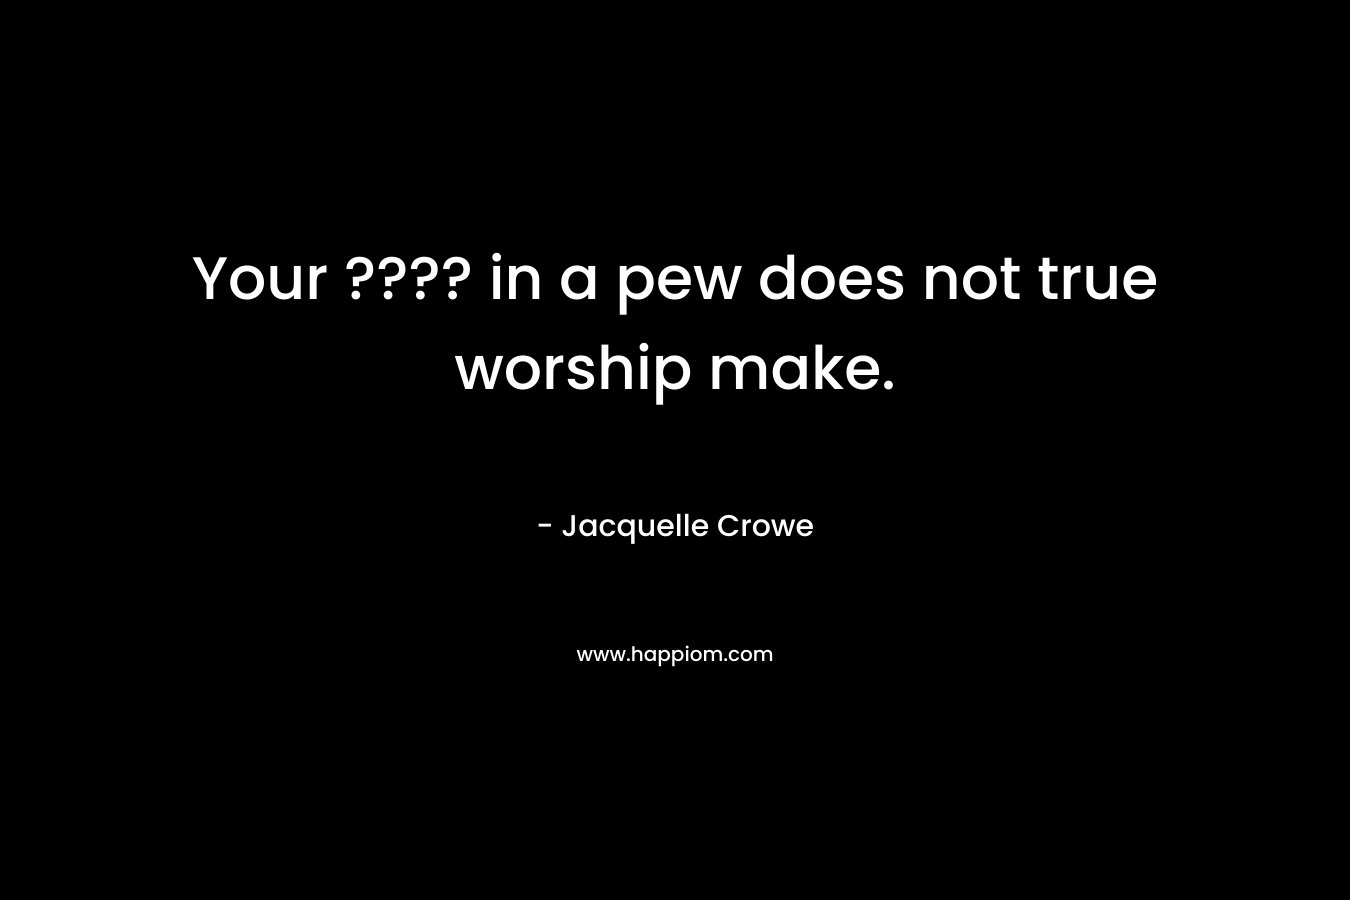 Your ???? in a pew does not true worship make.